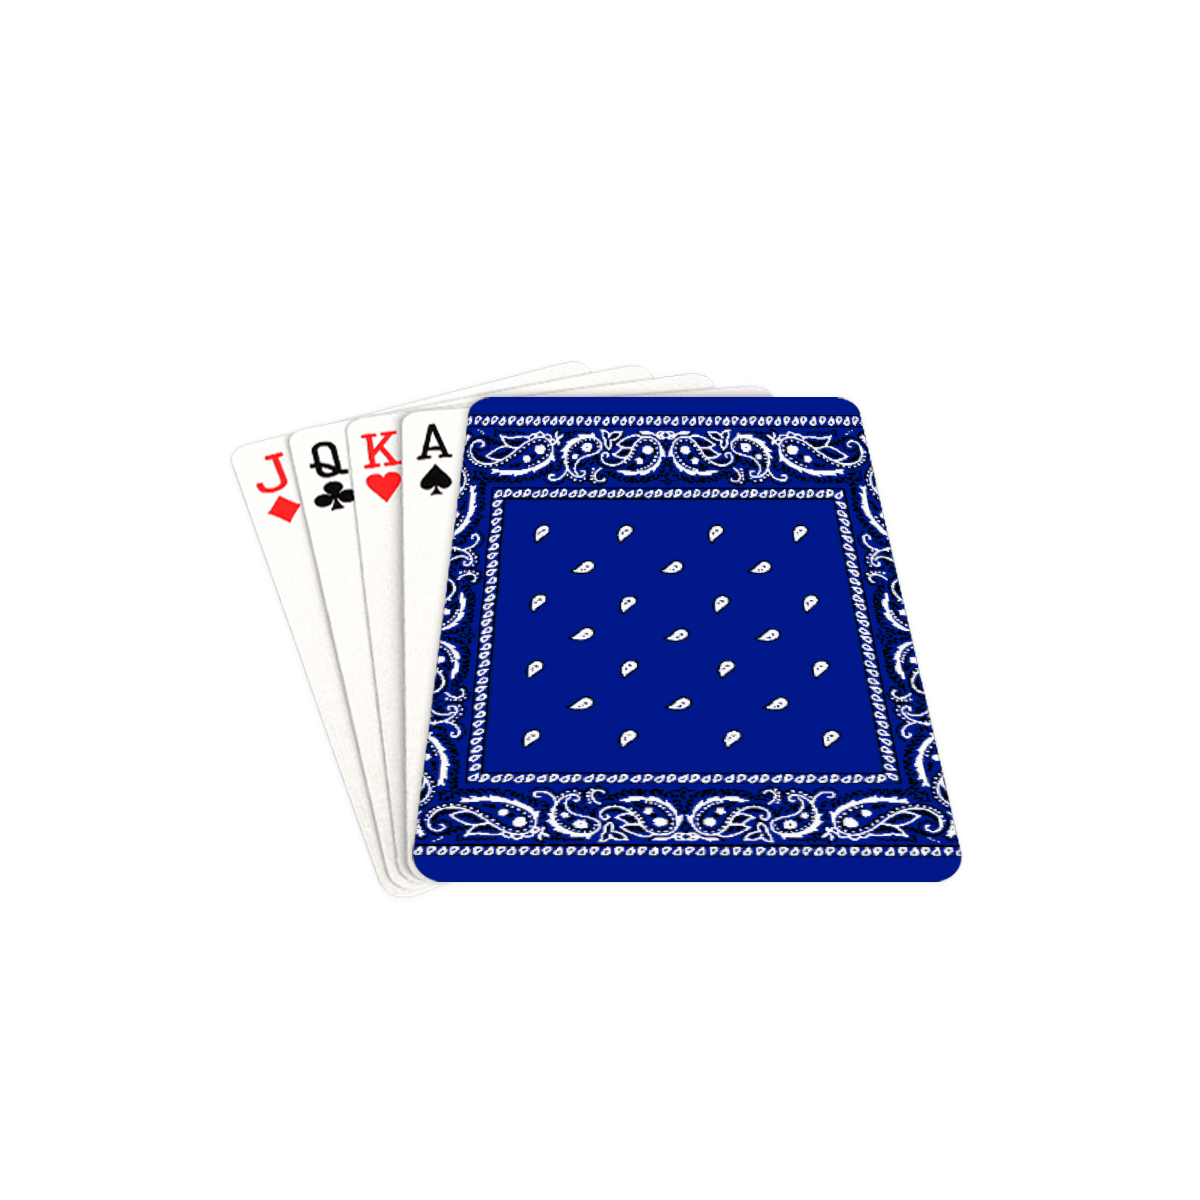 KERCHIEF PATTERN BLUE Playing Cards 2.5"x3.5"